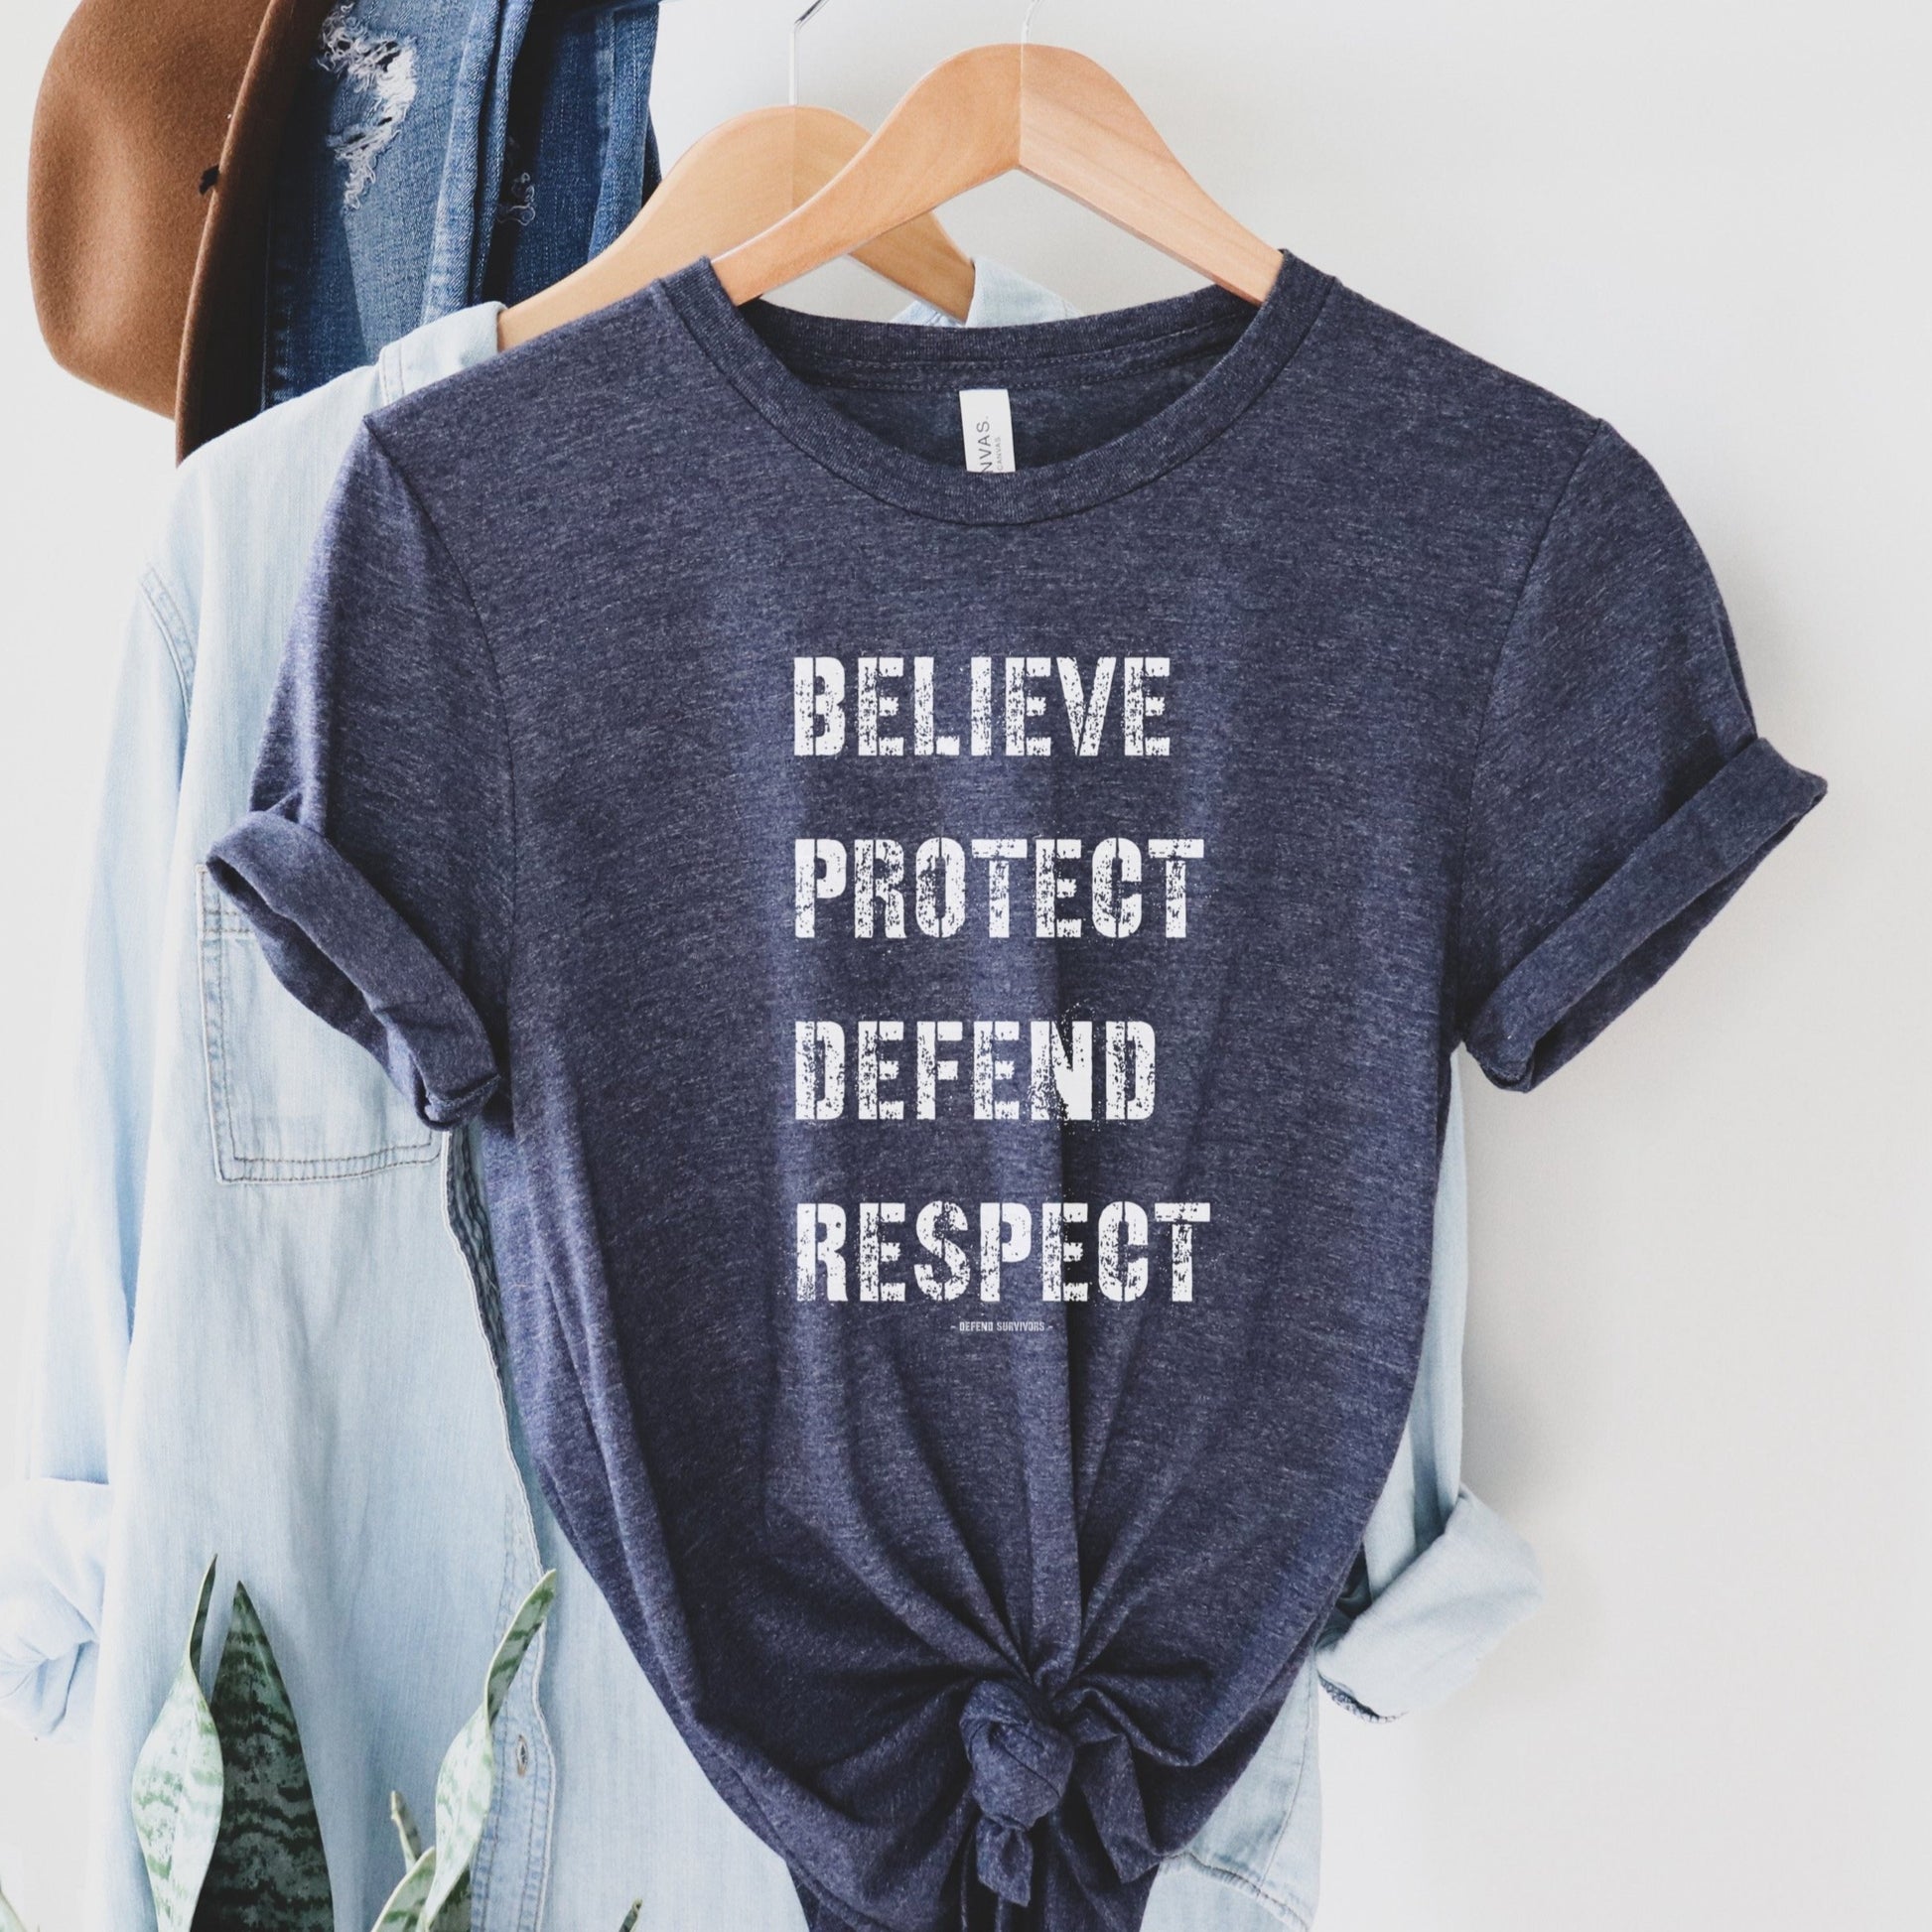 Believe Protect Defend Respect Shirt